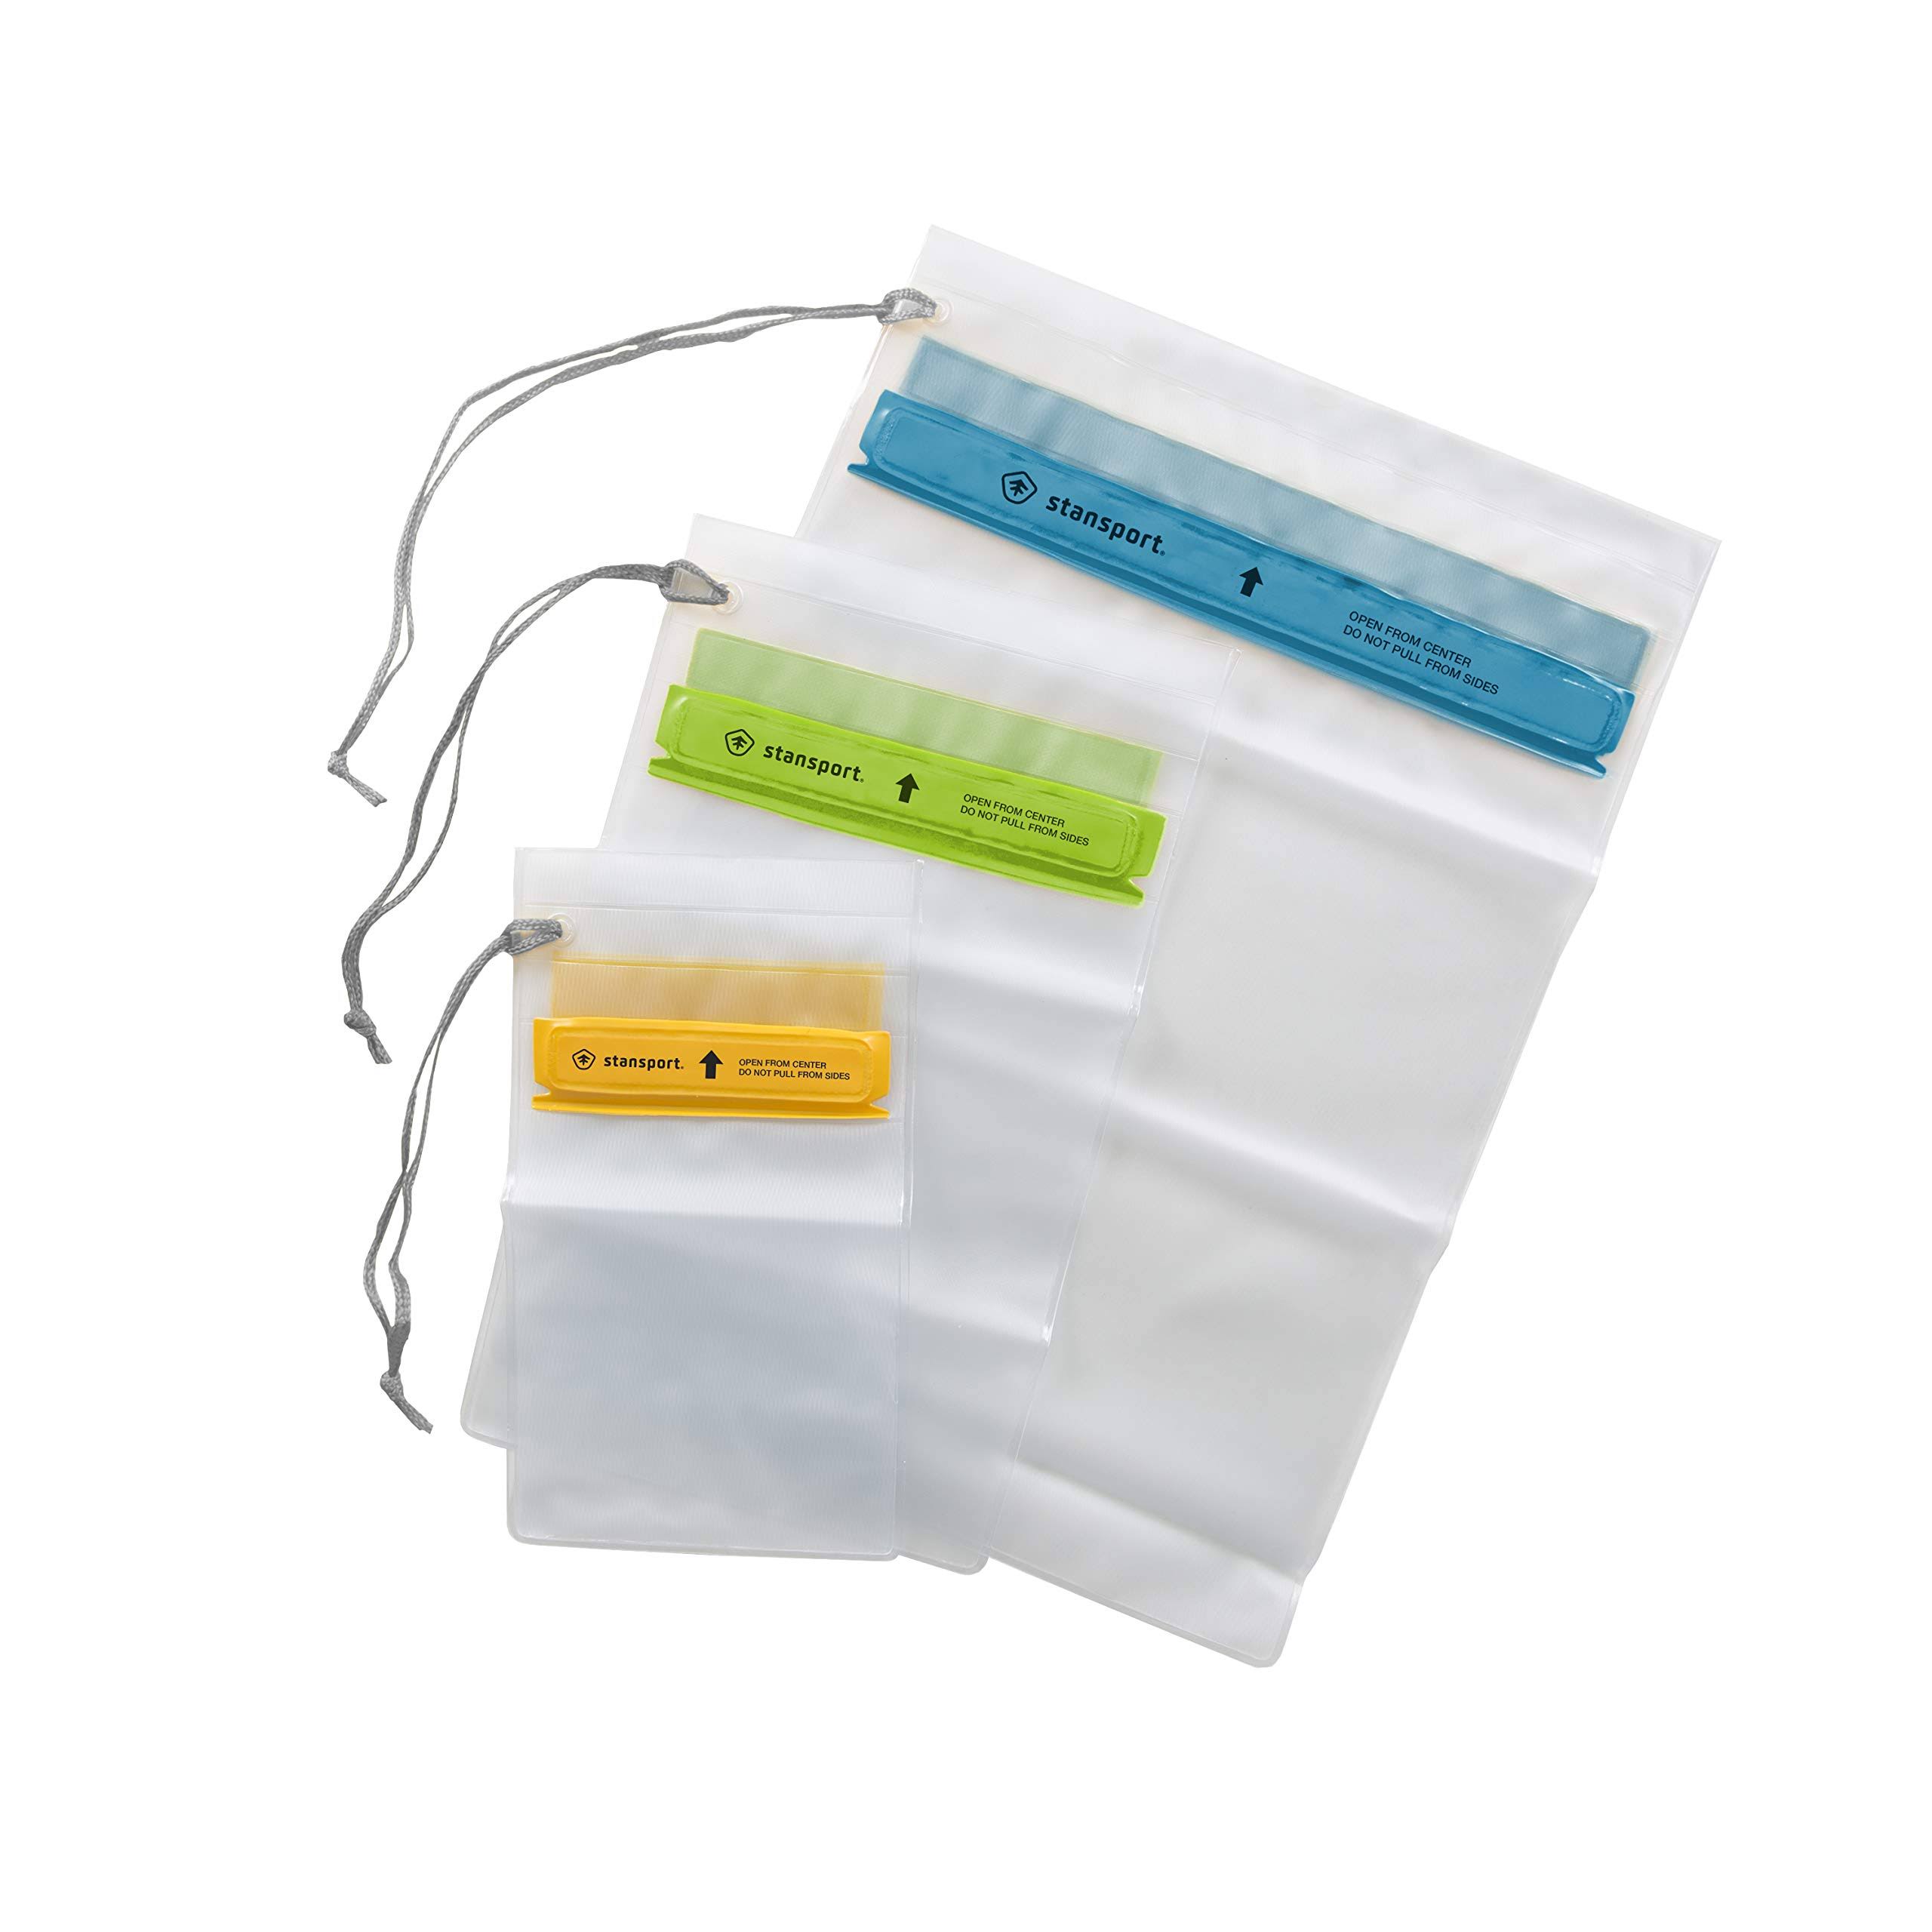 Stansport 465 Waterproof Pouches, 3 Pack